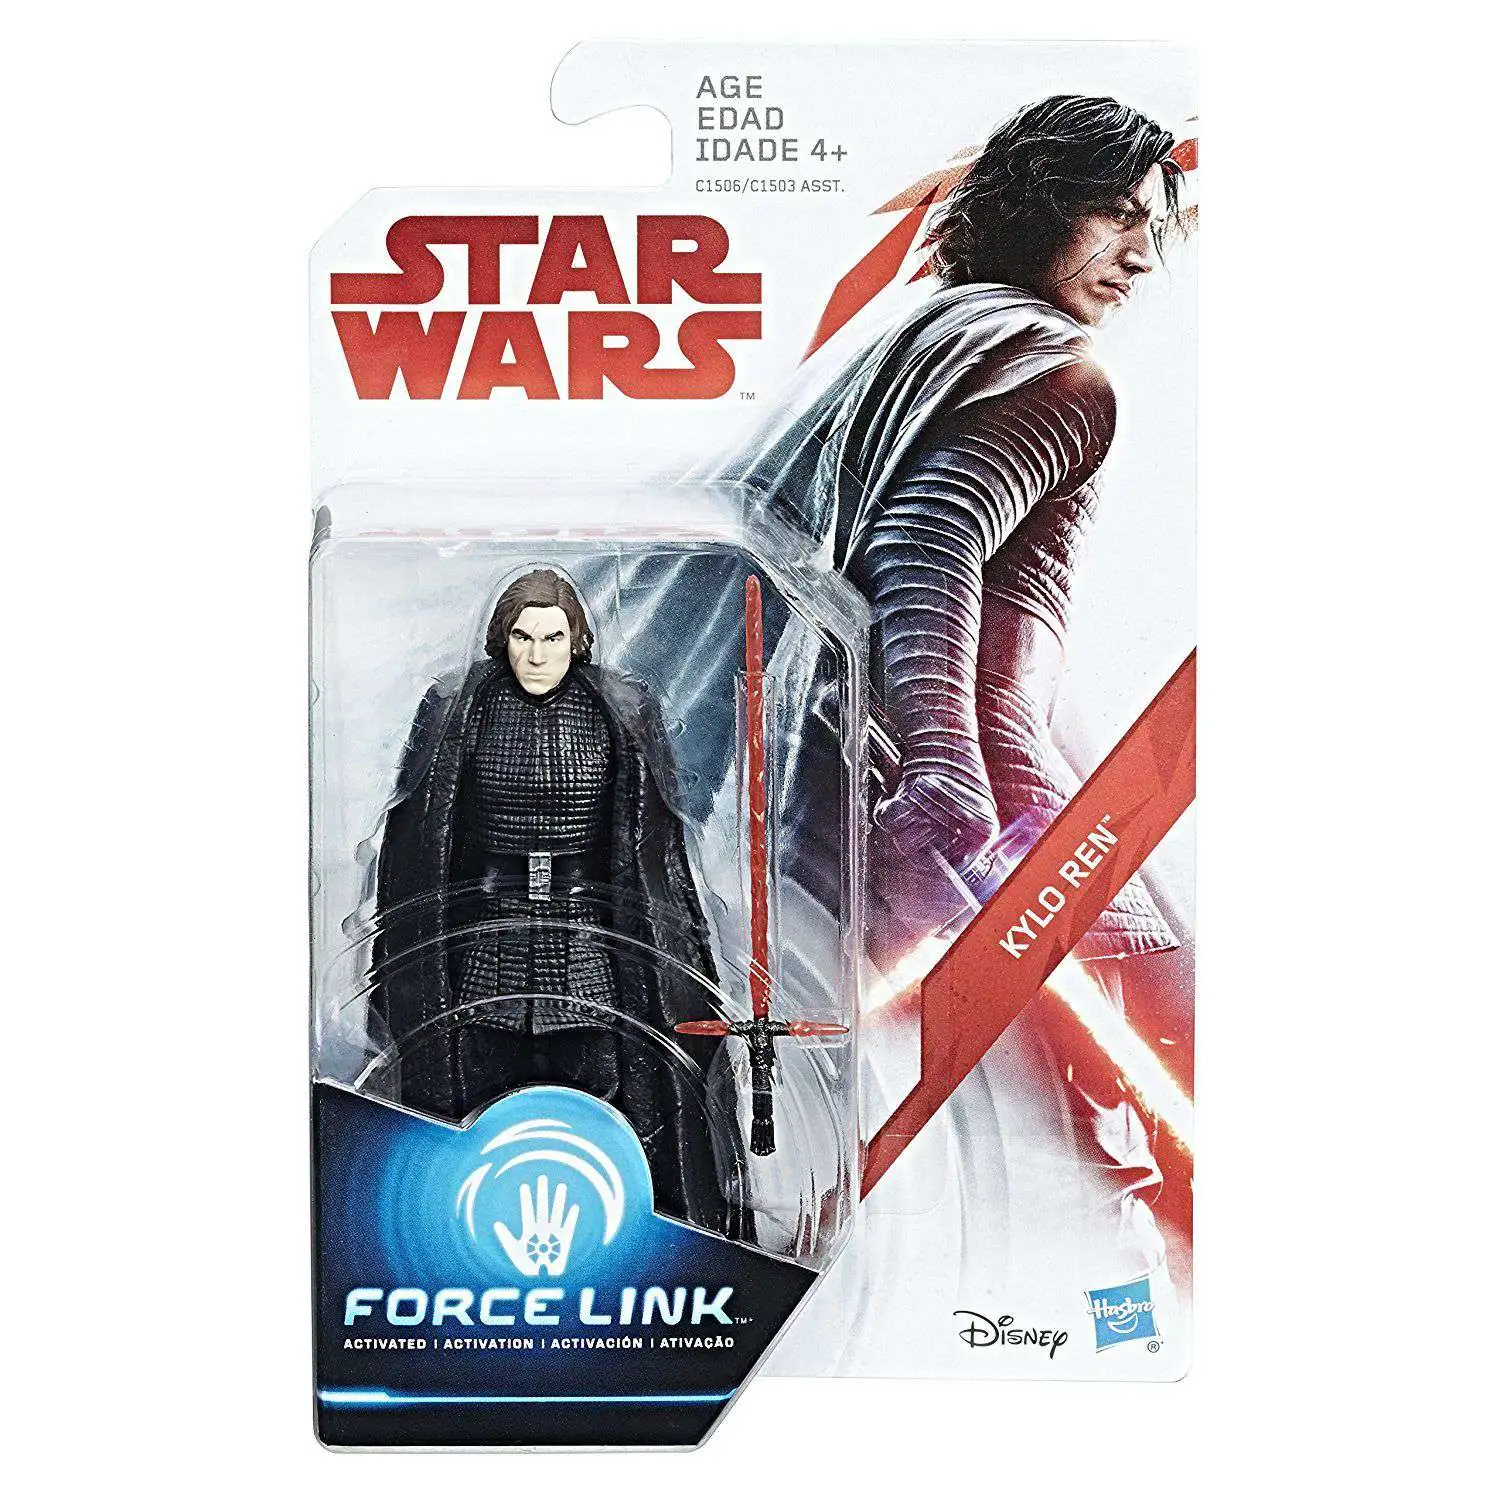 Star Wars Force Link 3.75-Inch Action Figures Fin Poe Leia Hux Paige Kylo 